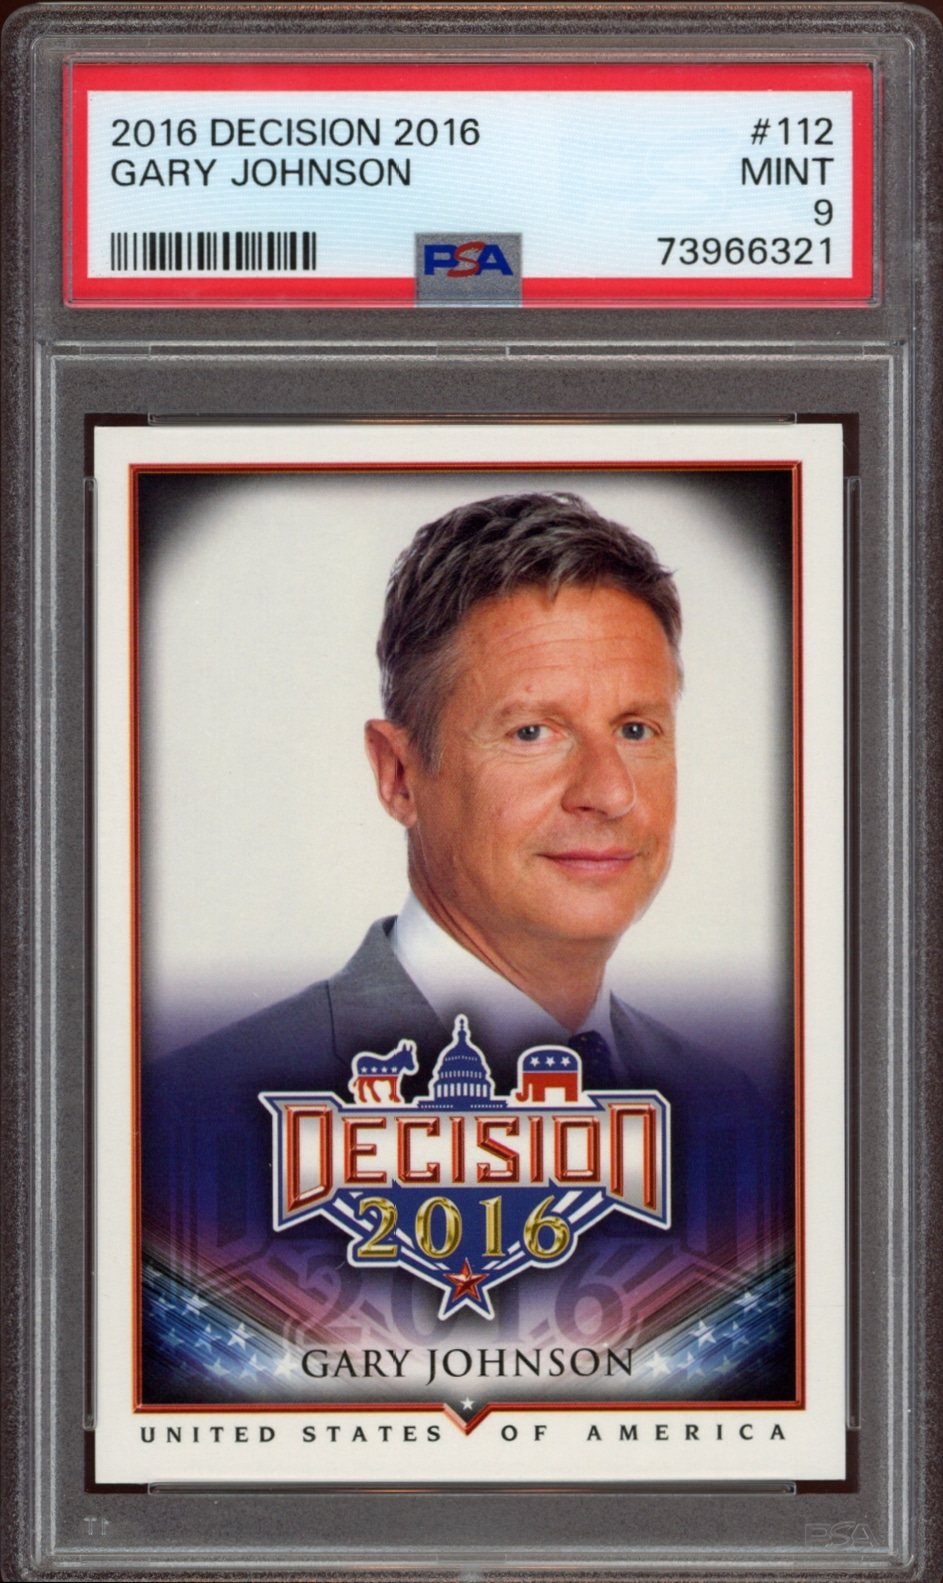 Gary Johnson collectible card from Decision 2016 series, rated MINT 9 by PSA.